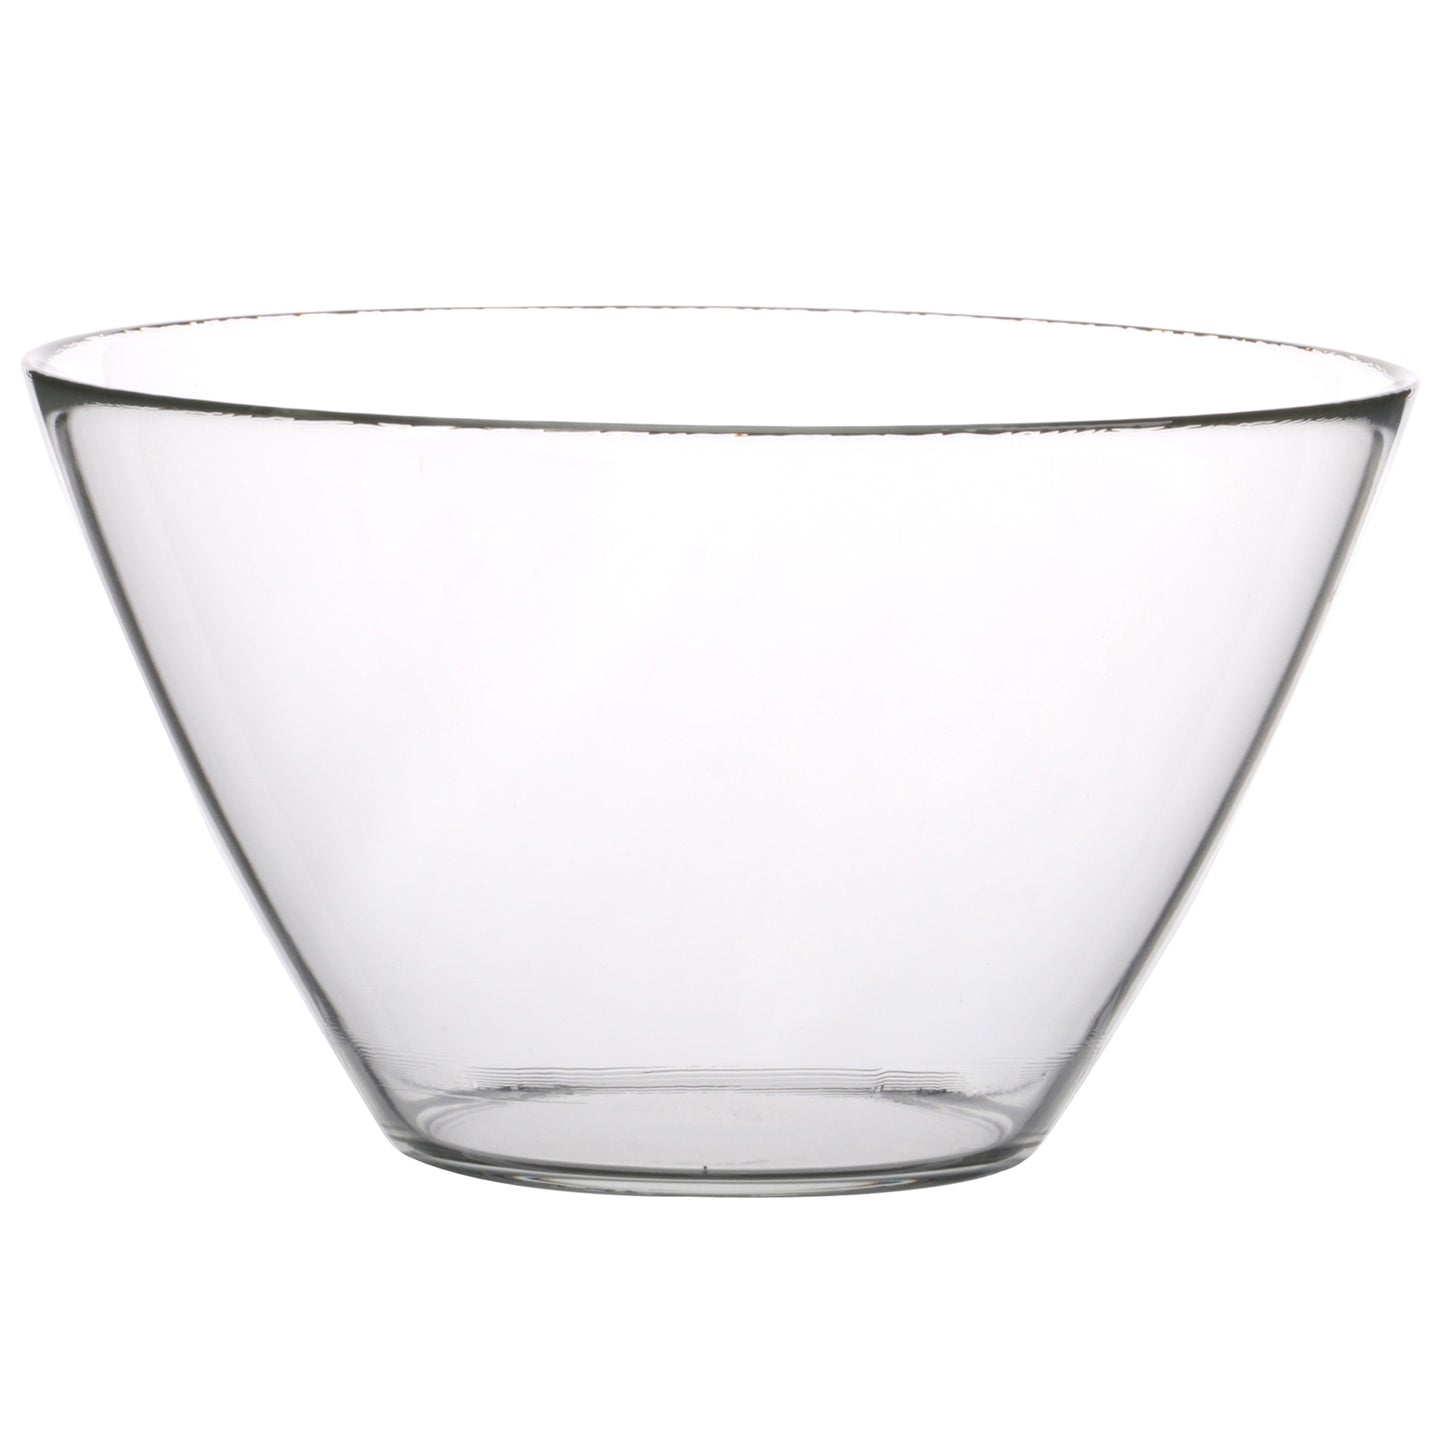 3.75 Litre Large Round Glass Bowl